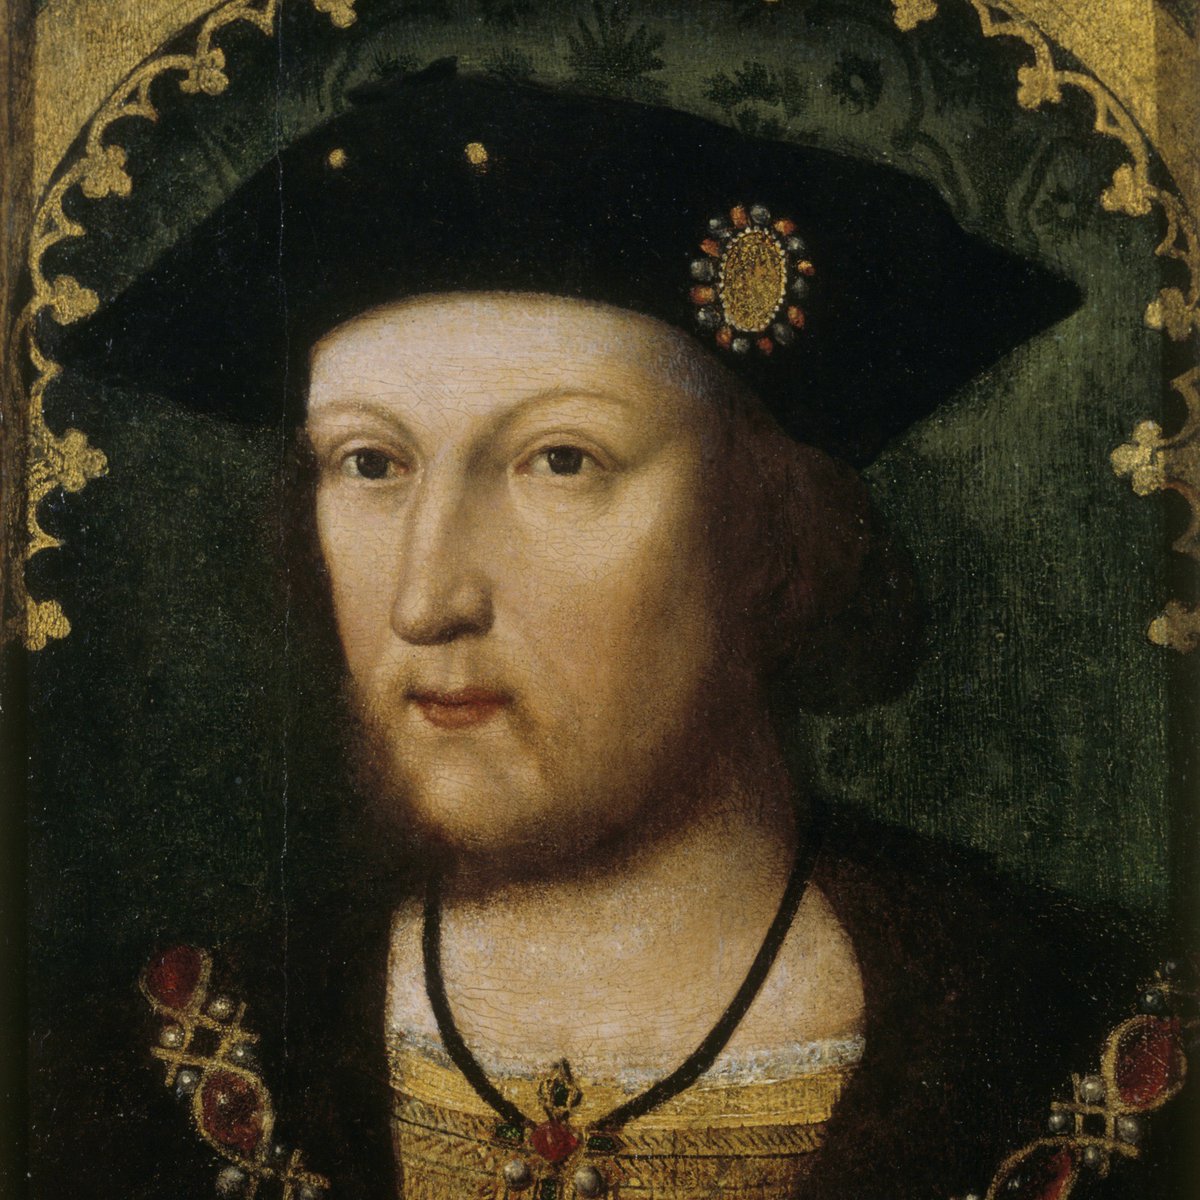 Meanwhile in England, Henry Tudor was crowned Henry VIII after his brother Arthur’s untimely death a few years earlier. He was only 17 when he ascended the throne, and unlike his elder brother had not been groomed from an early age to be king. [LP]  @nationaltrust